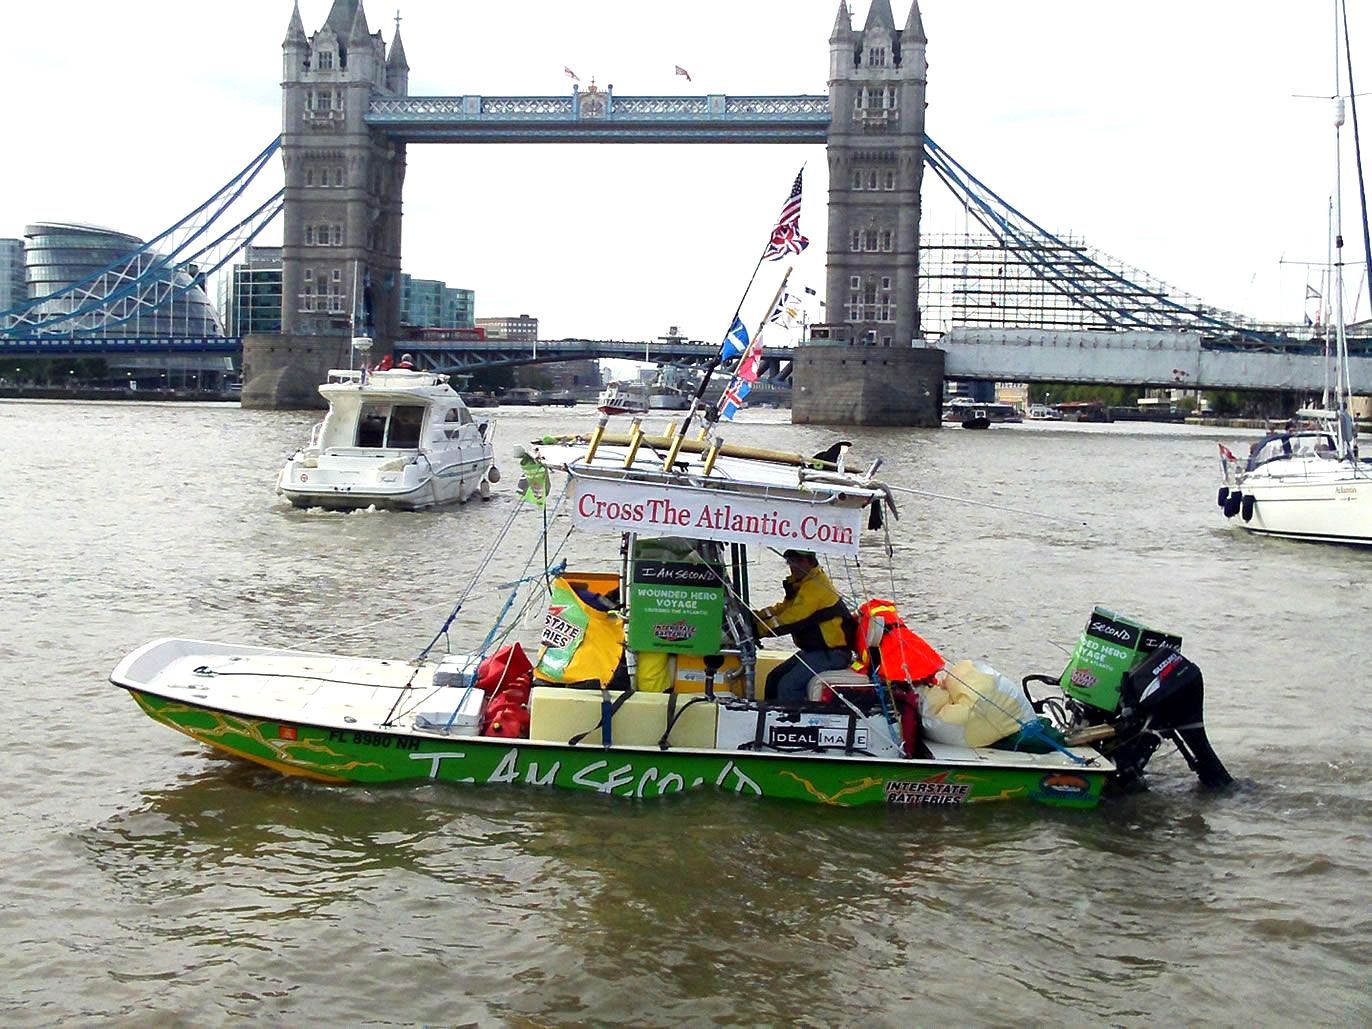 
The First Flats Boat to Cross The Atlantic Ocean Unassisted, world record set by Ralph Brown and Robert Brown